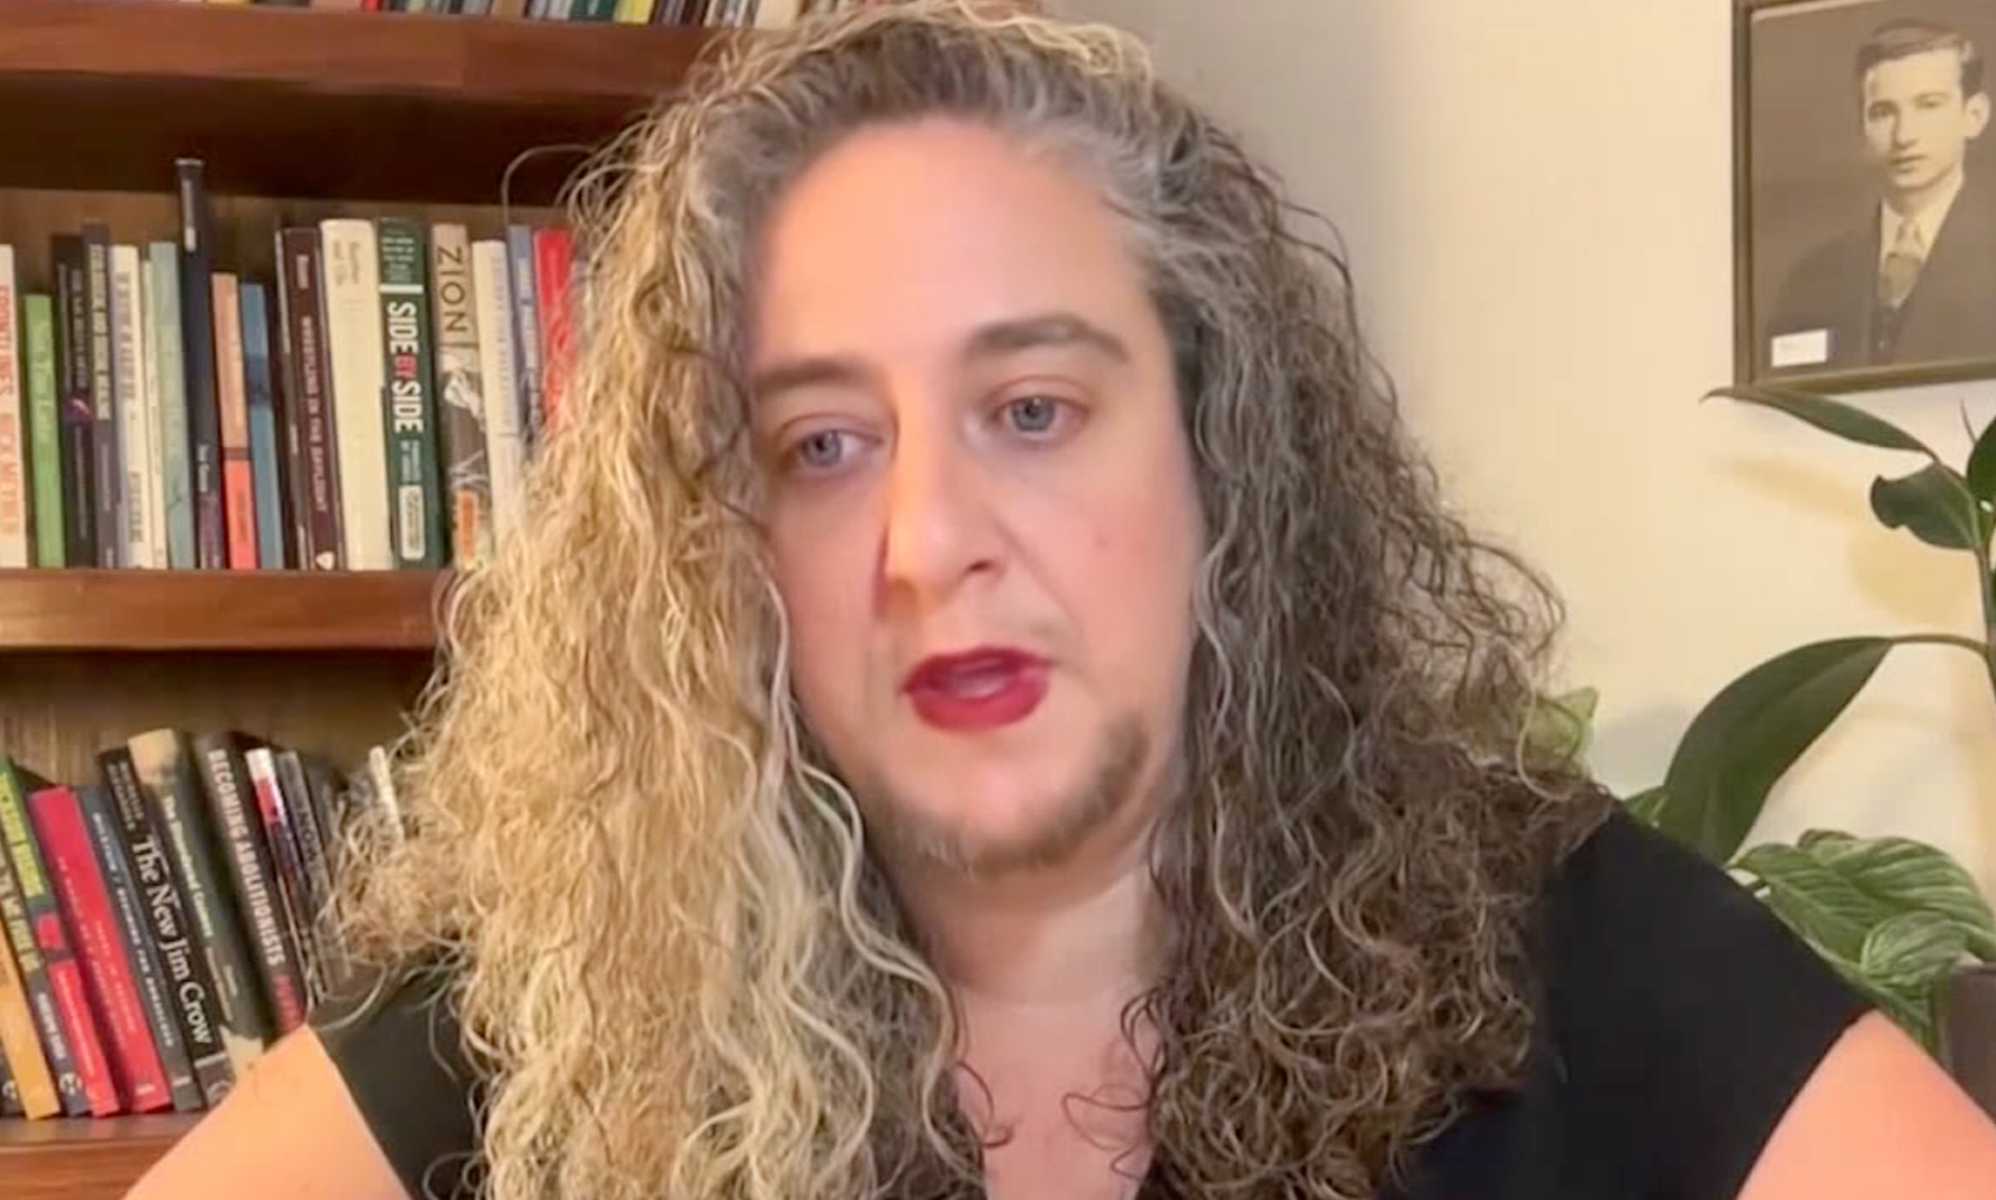 Riley Gaines dragged for claim trans women have chess advantage